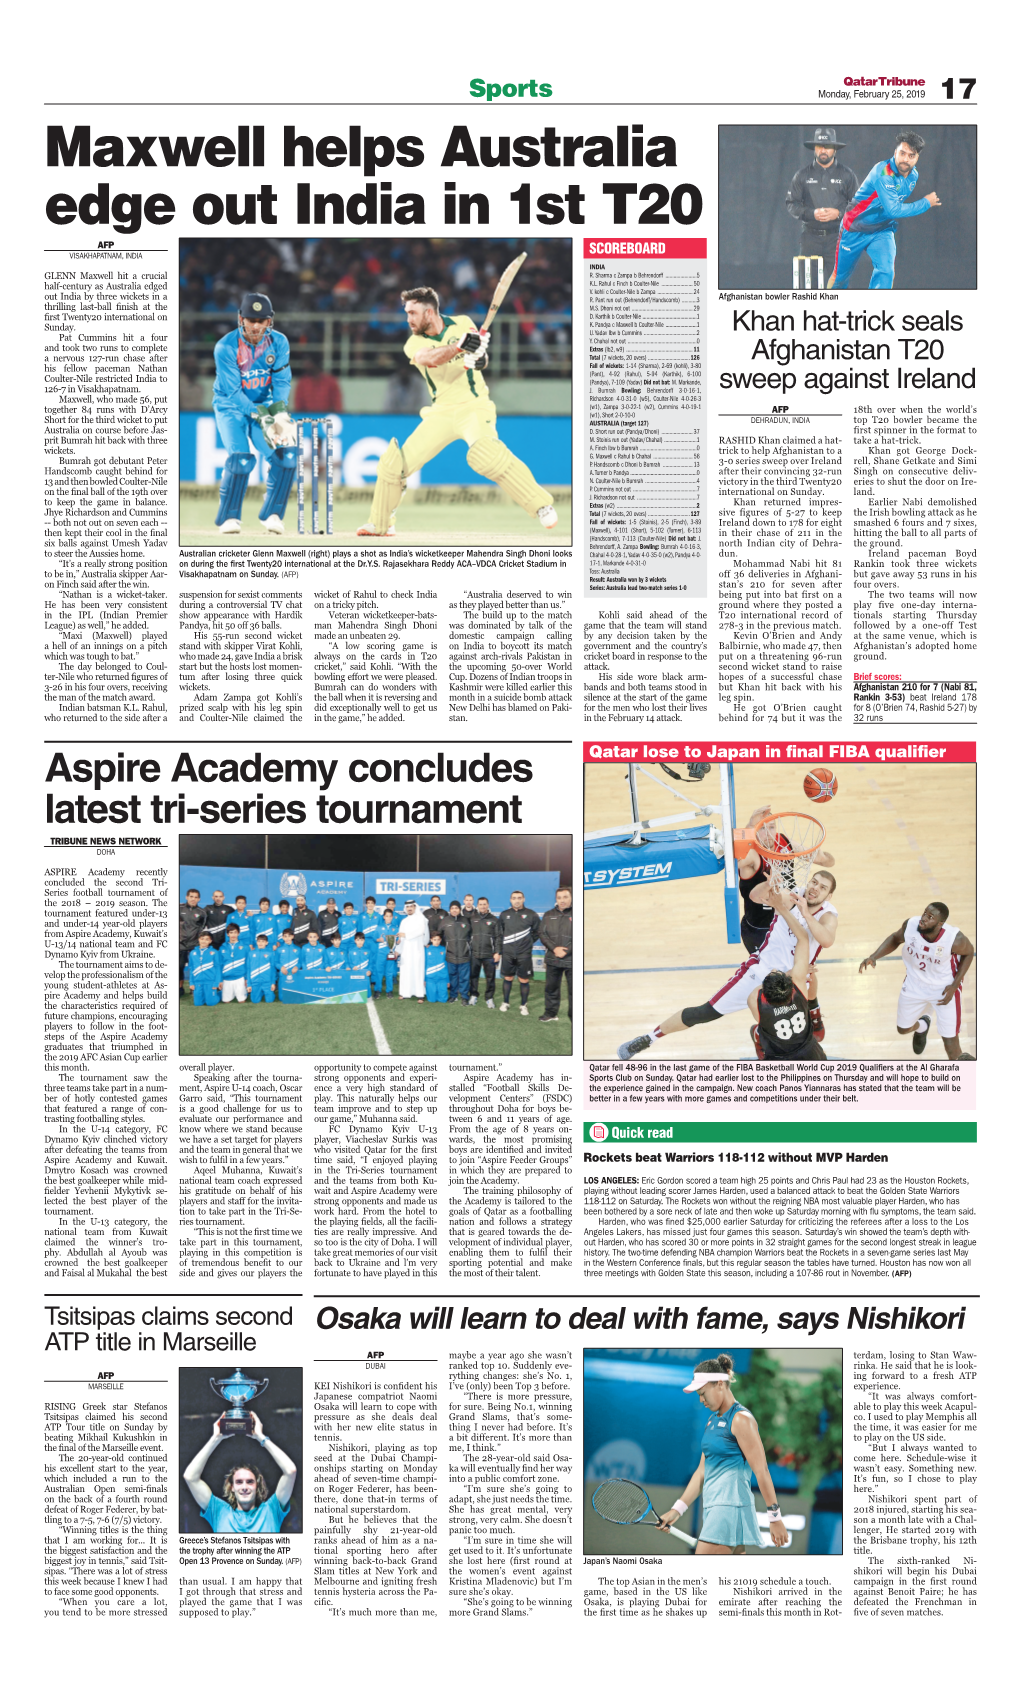 Maxwell Helps Australia Edge out India in 1St T20 Afp Visakhapatnam, India Scoreboard India Glenn Maxwell Hit a Crucial R